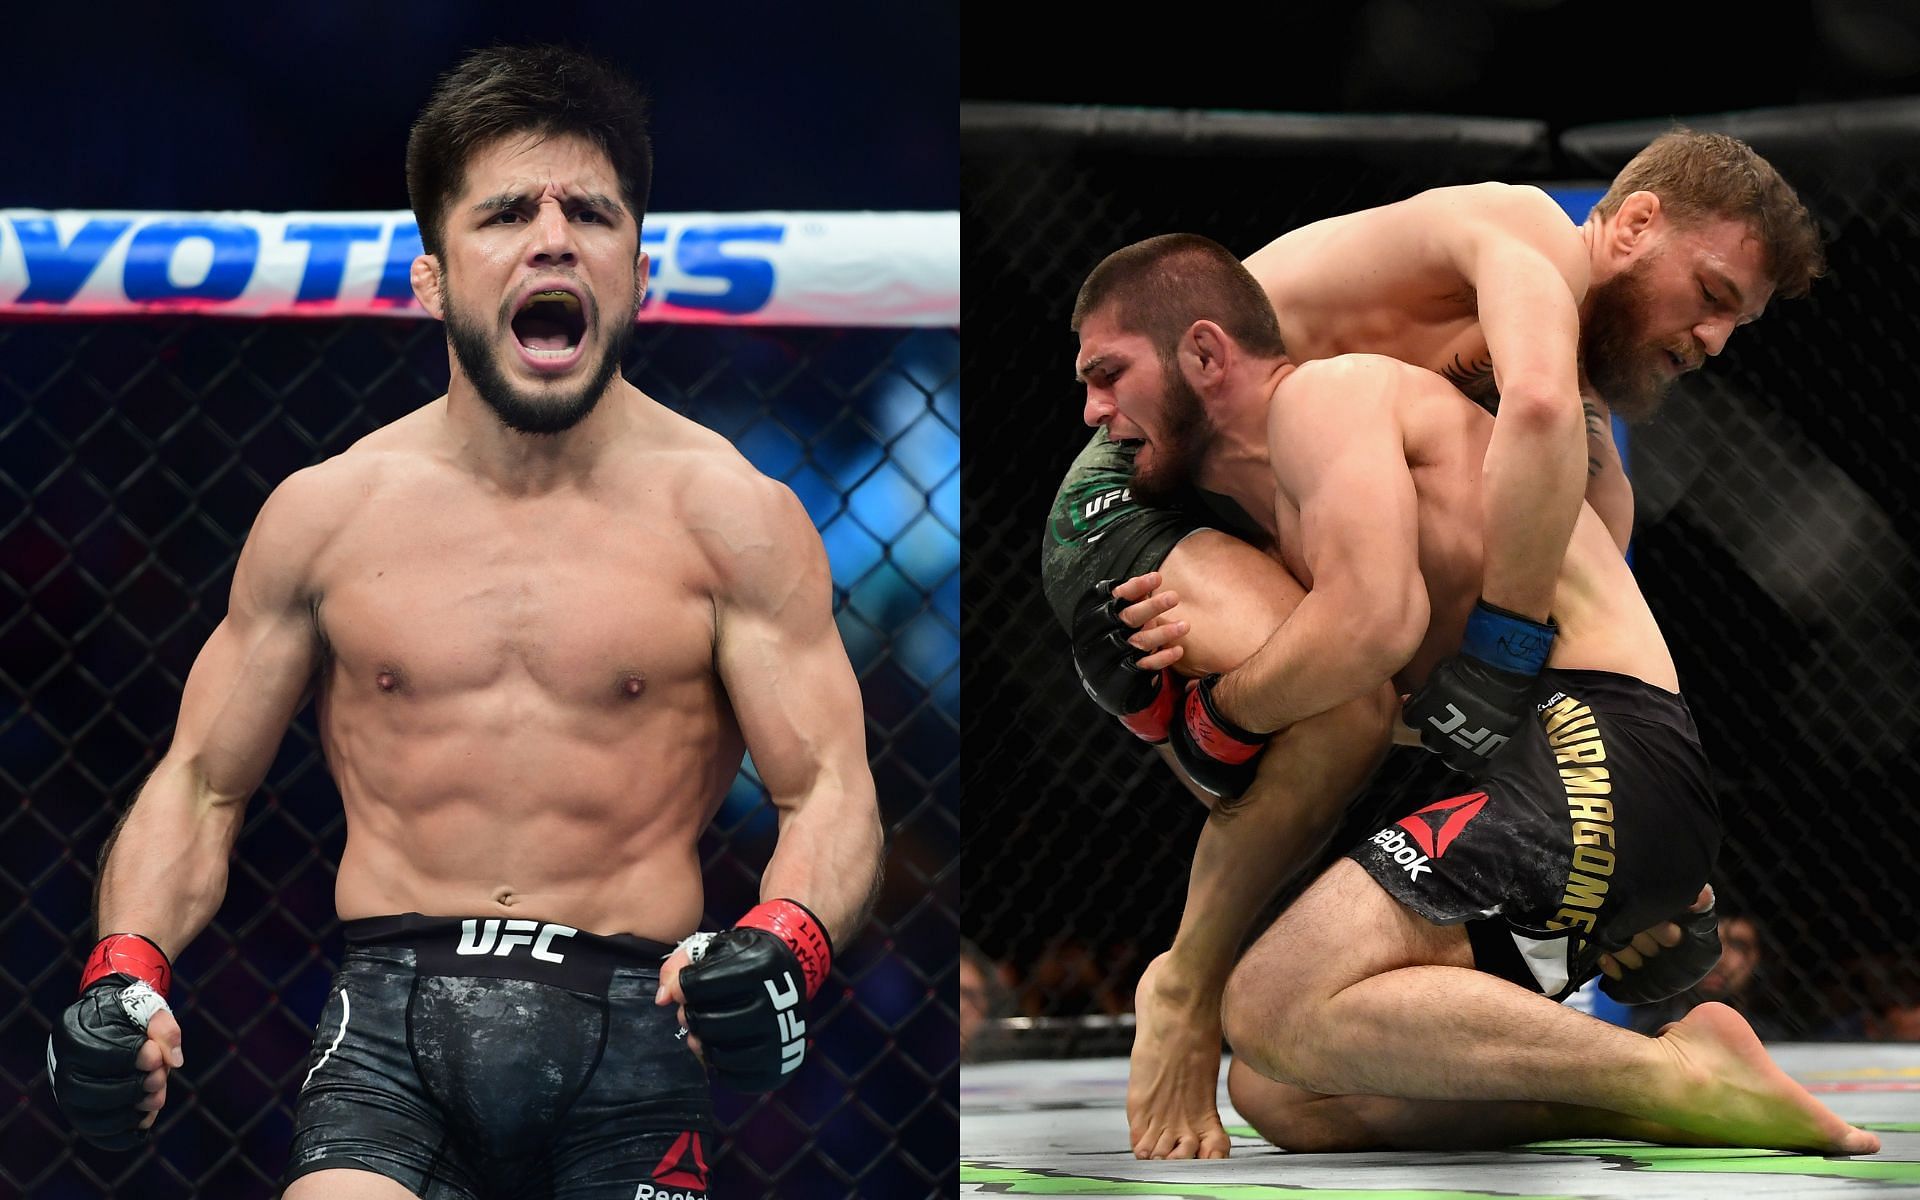 Former UFC fighter Henry Cejudo (left) and action from the bout between Khabib Nurmagomedov and Conor McGregor (right)